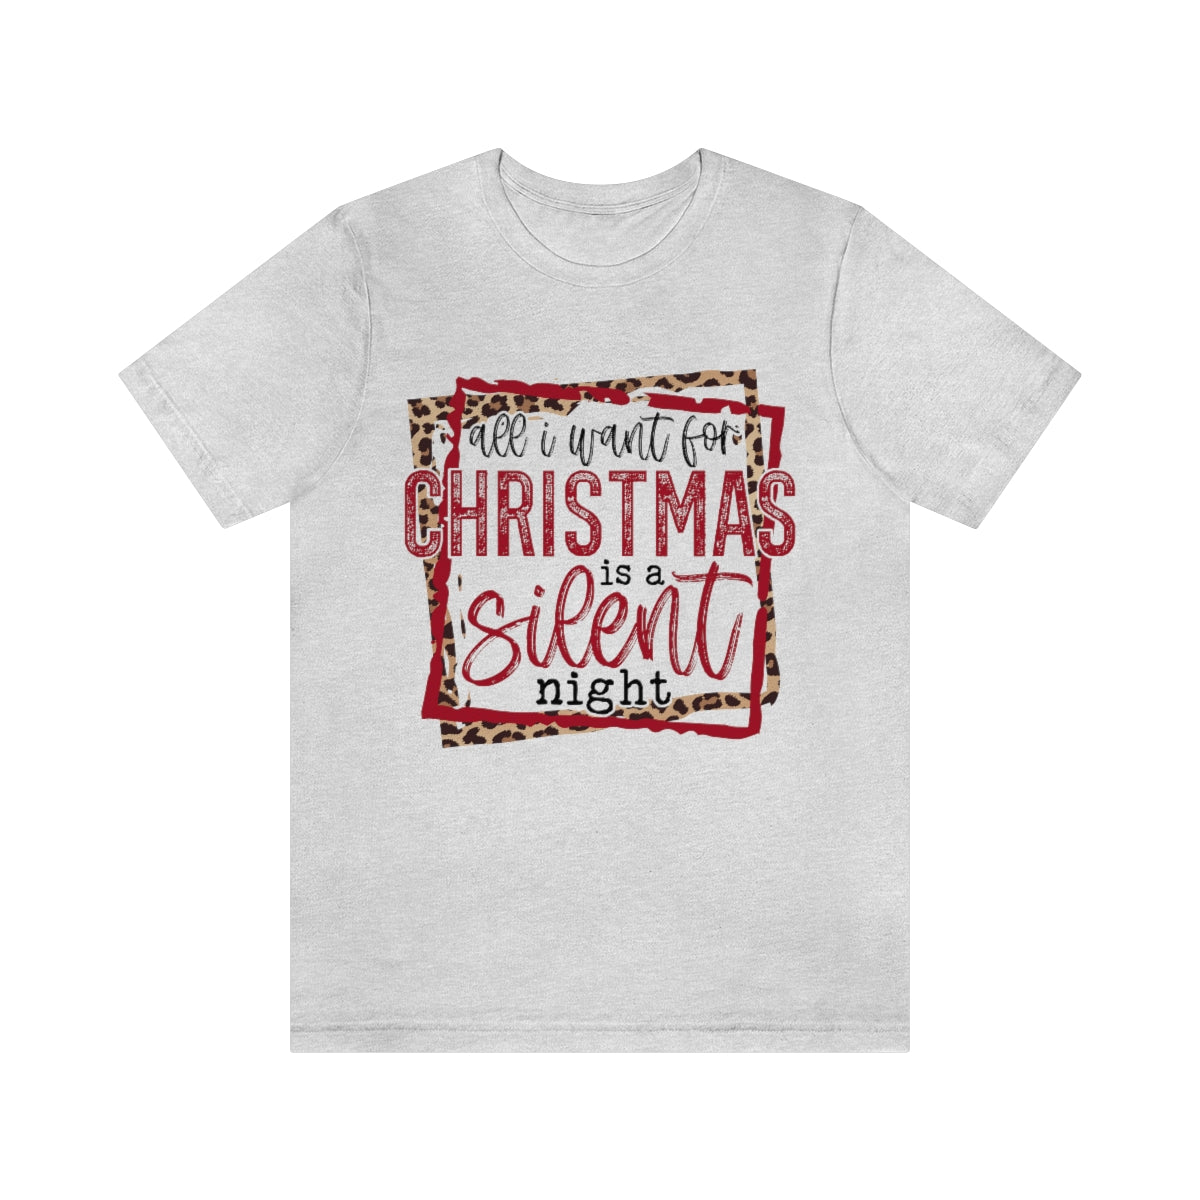 All I Want For Christmas is a Silent Night Shirt